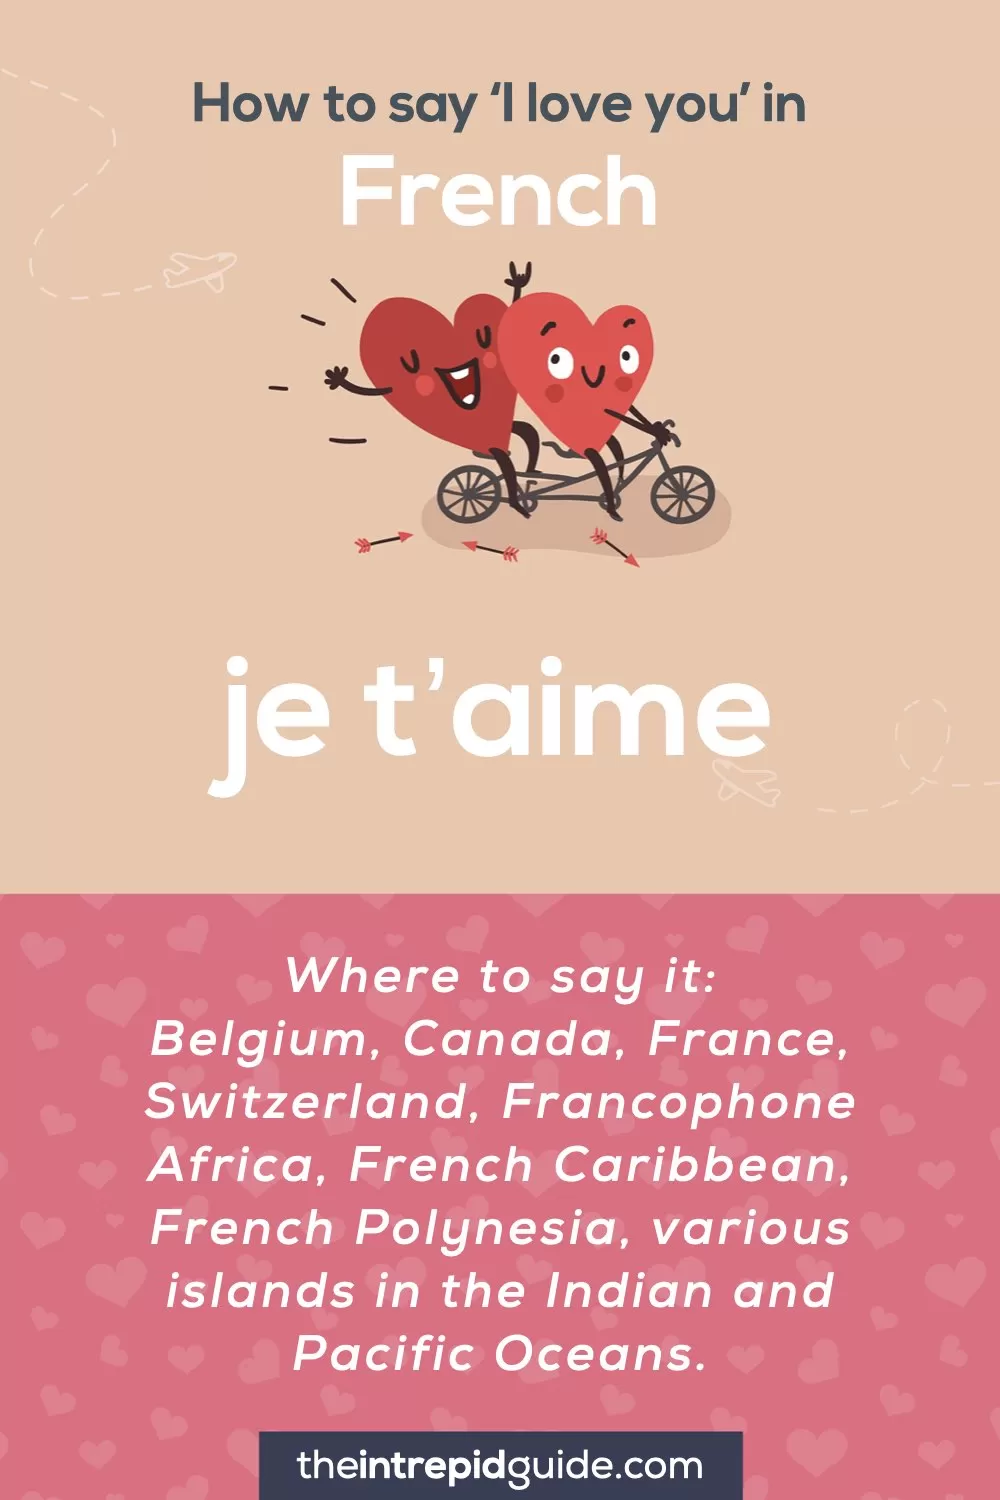 How to say I love you in different languages - French - je t’aime